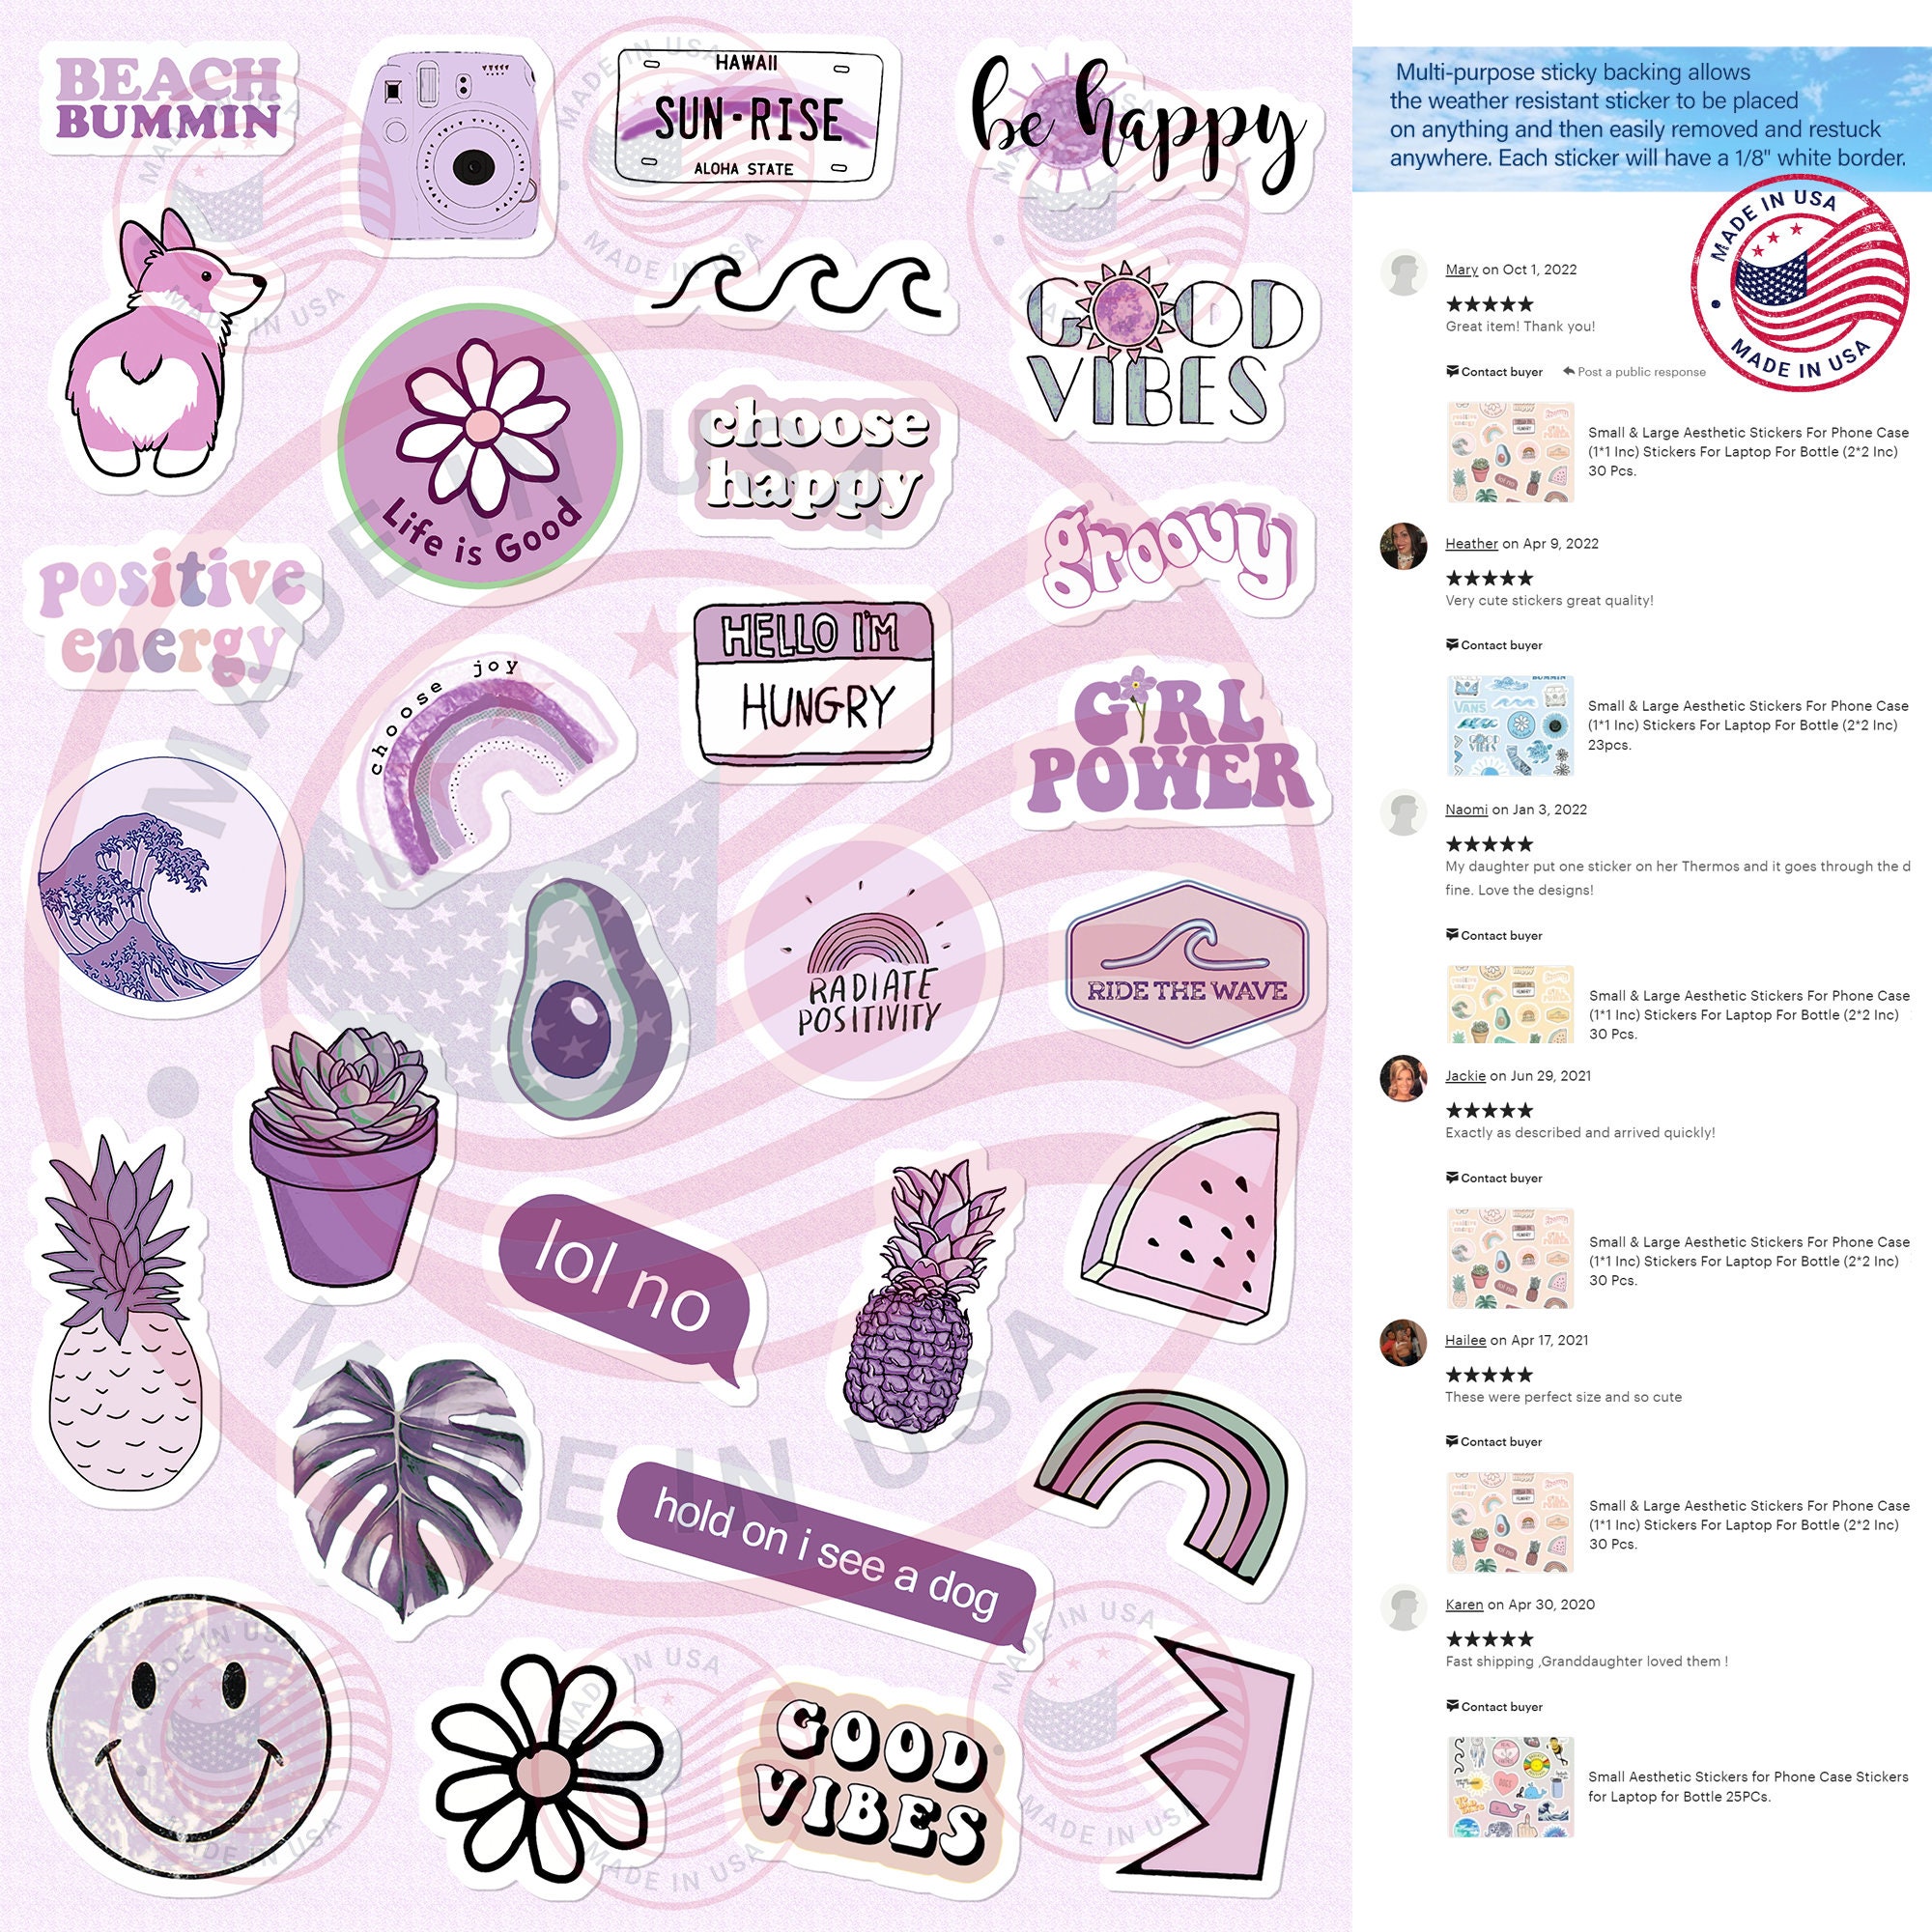 Small & Large Aesthetic Stickers for Phone Case 11 Inc Stickers for Laptop  for Bottle 22 Inc 30 Pcs. 